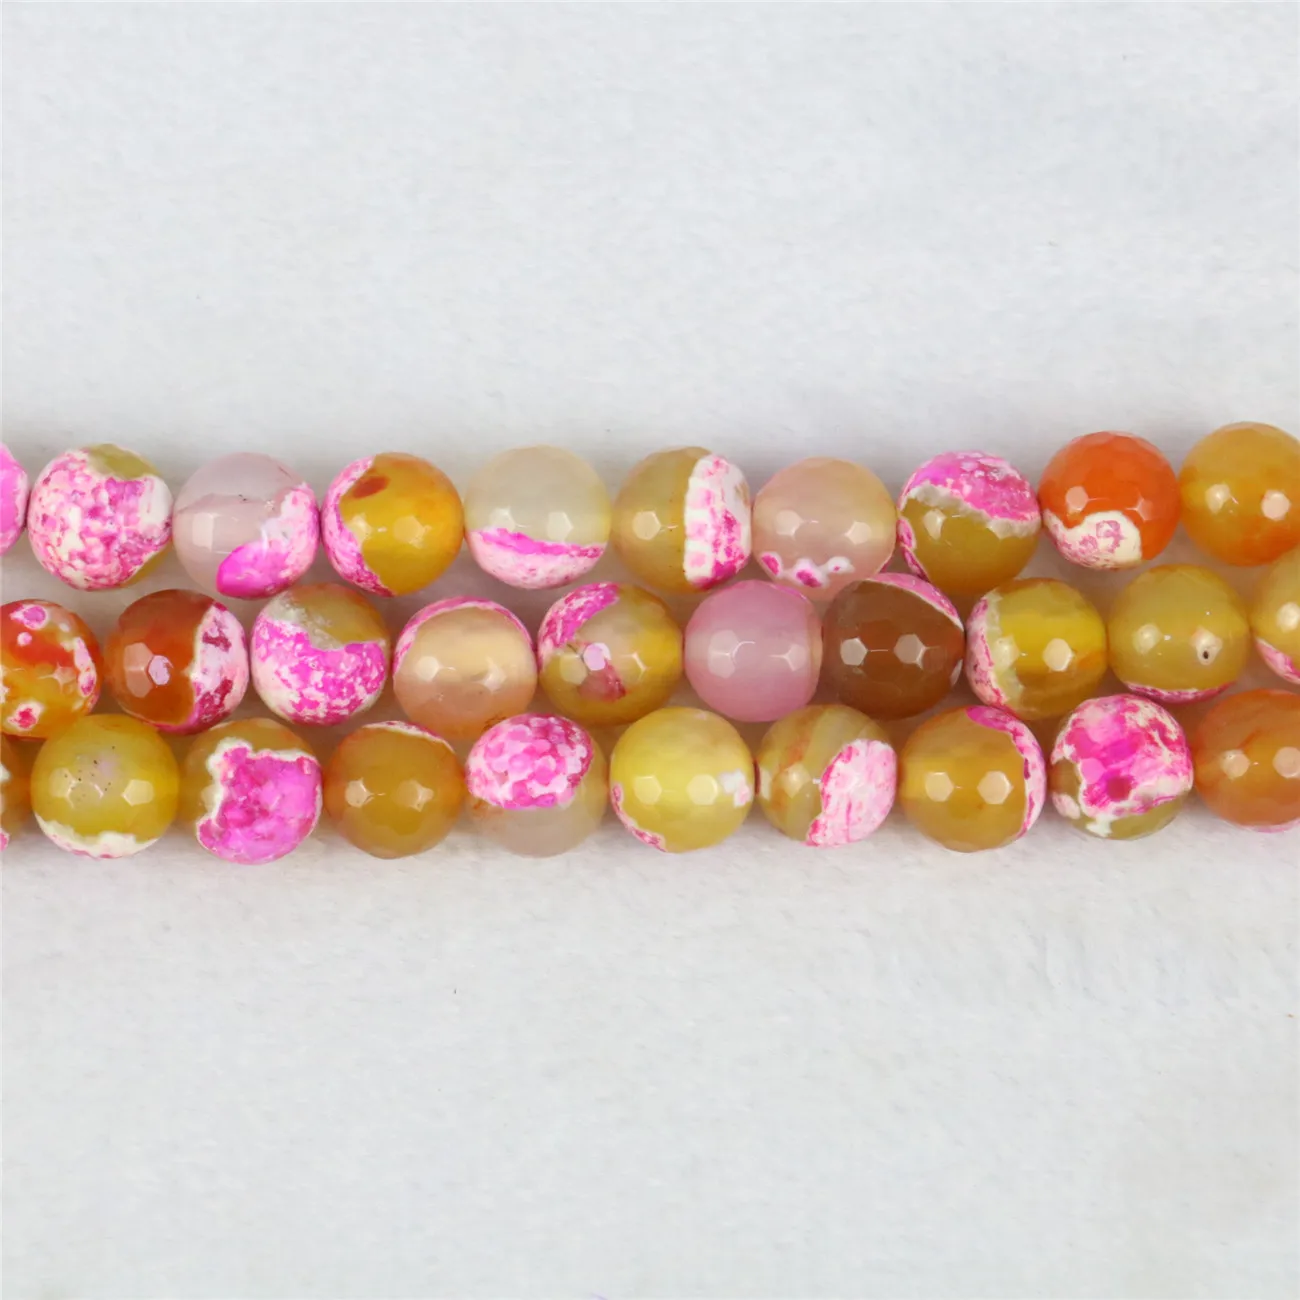 

10mm Faceted Round Pink Yellow Agates Onyx Loose Beads Natural Stone Women Girls DIY Ornaments Fashion Jewelry Making Design